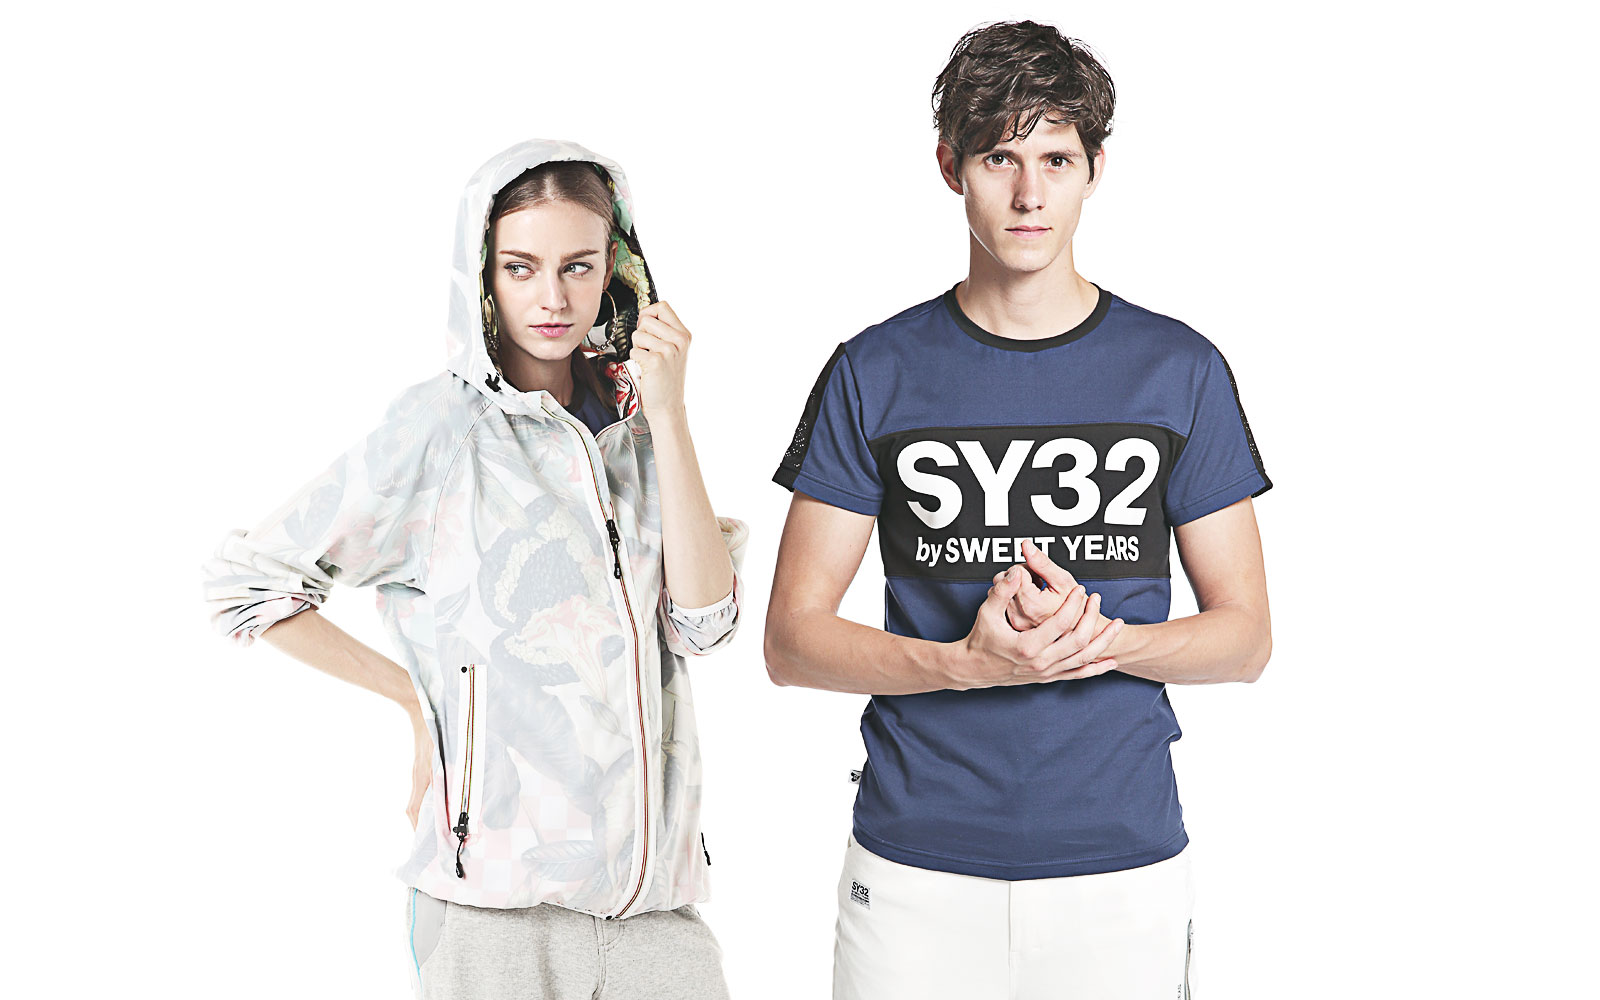 SY32 by Sweet years